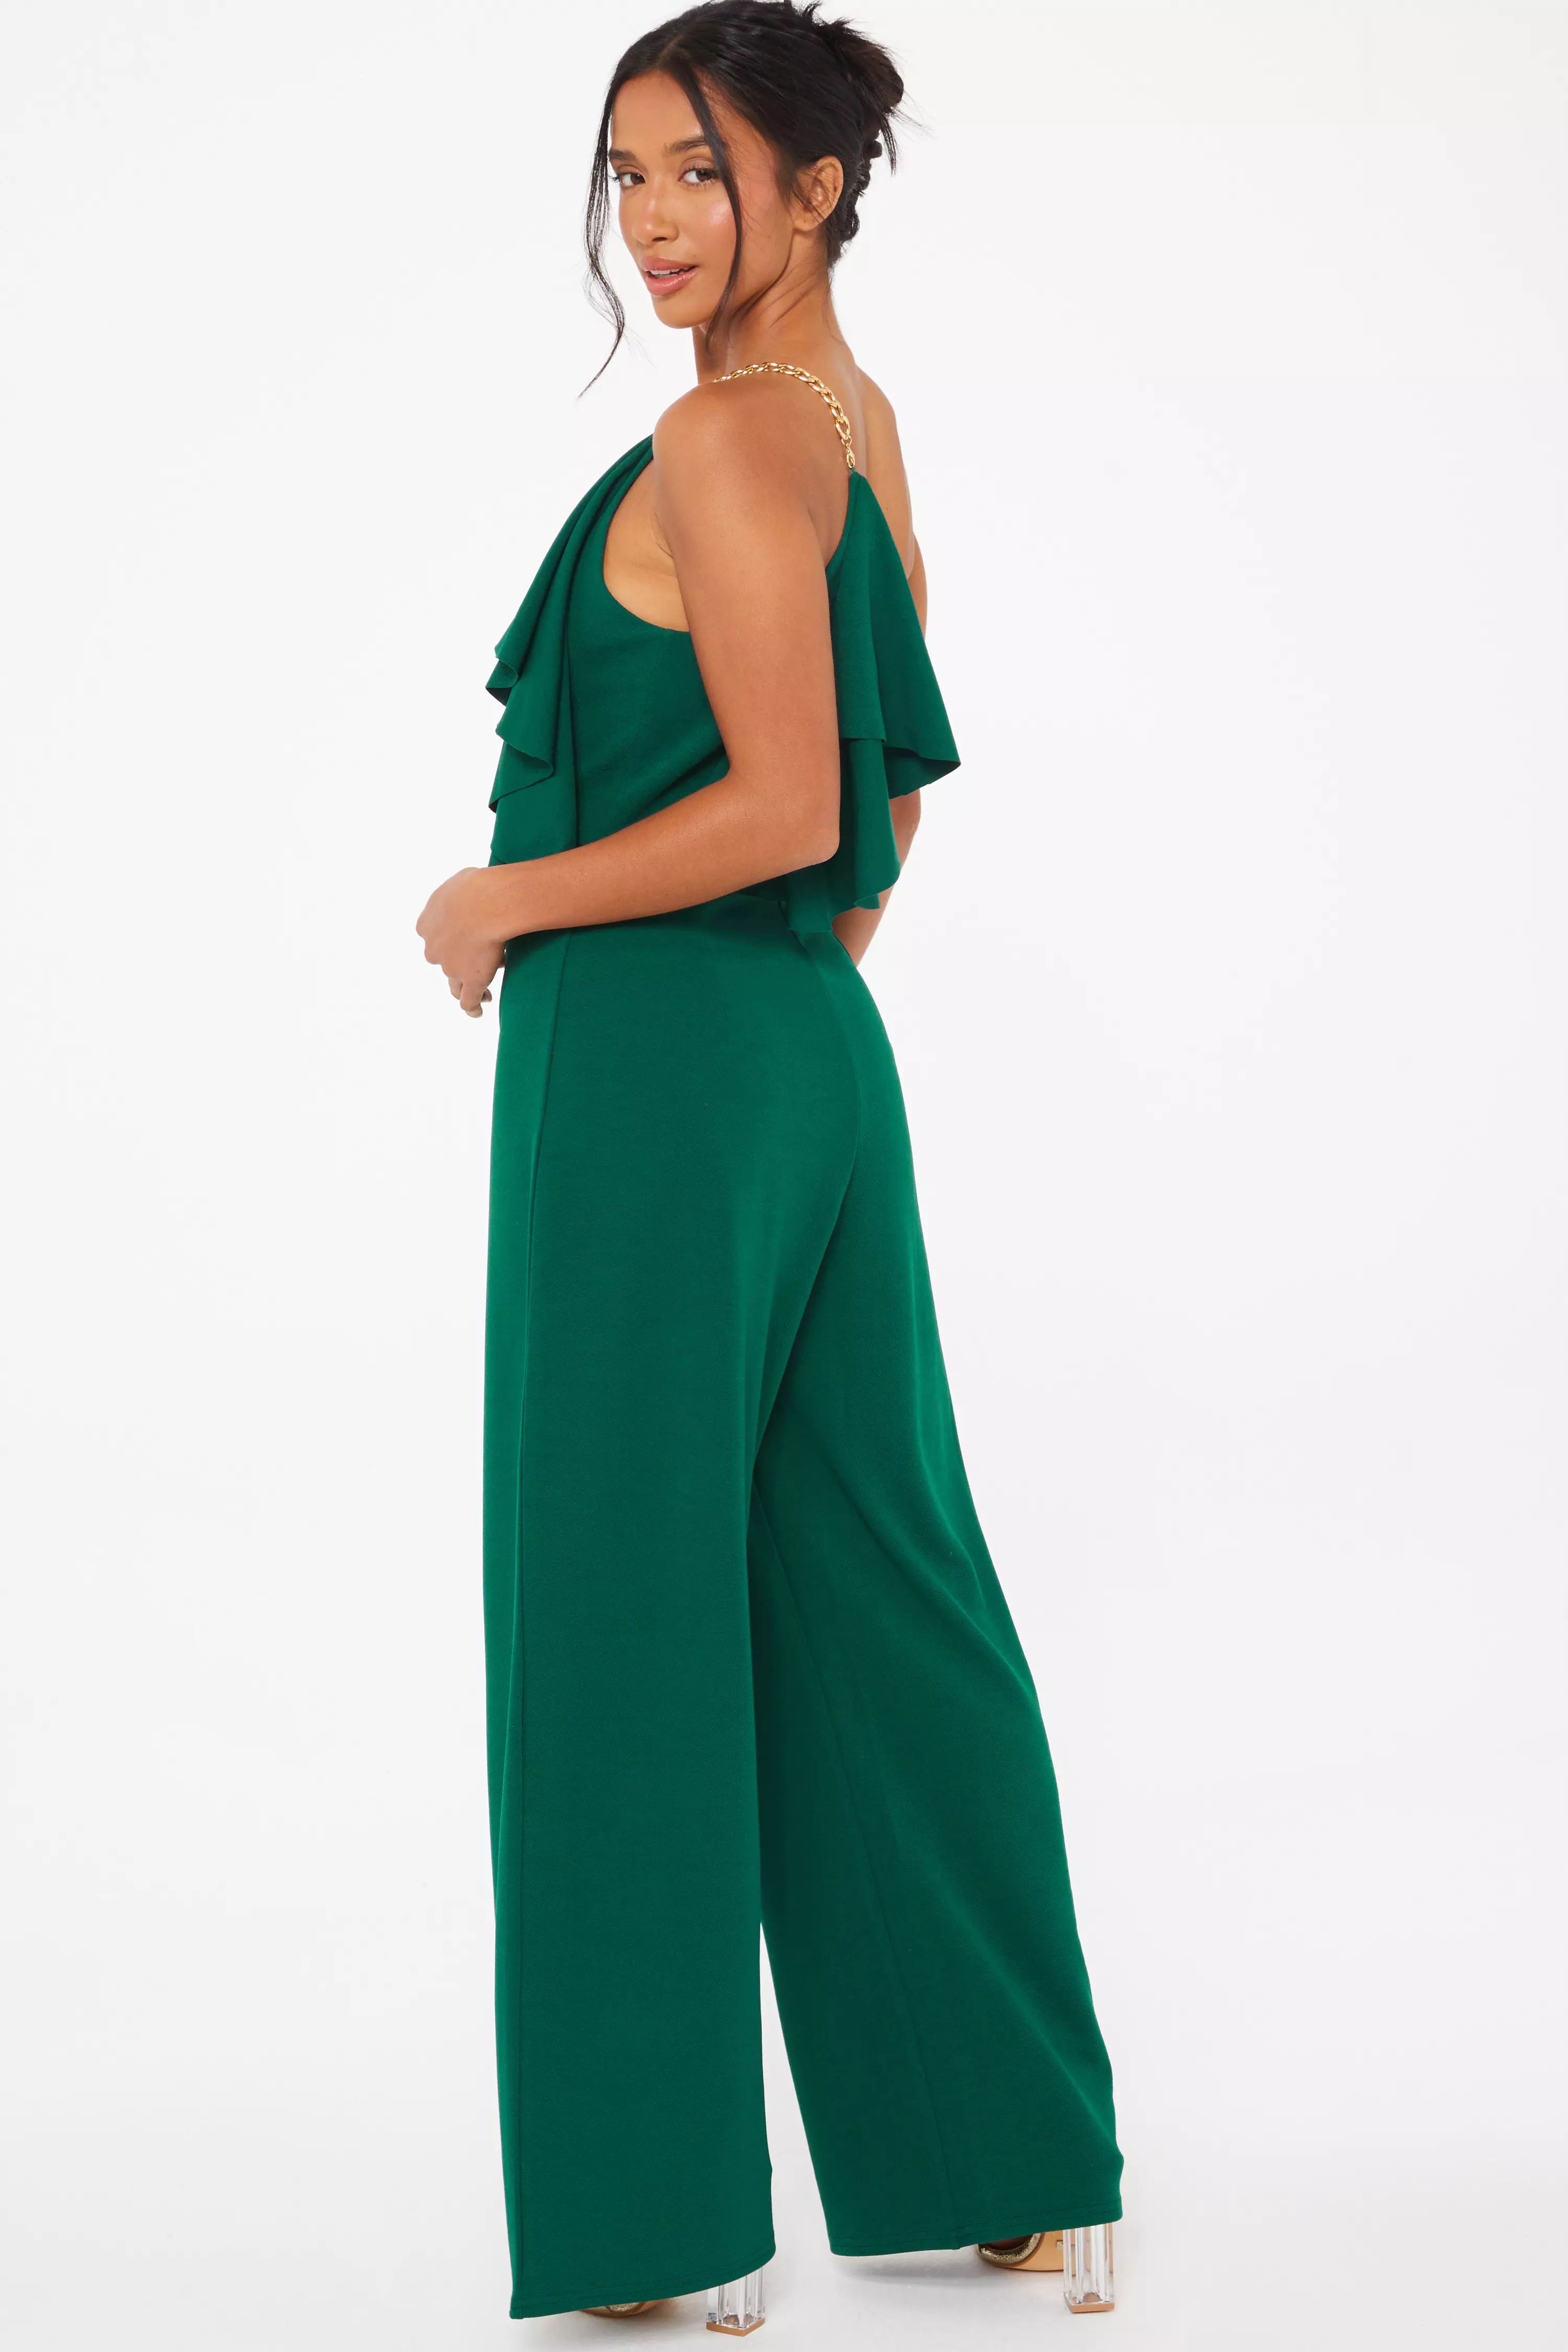 Petite Bottle Green One Shoulder Frill Palazzo Jumpsuit - QUIZ Clothing